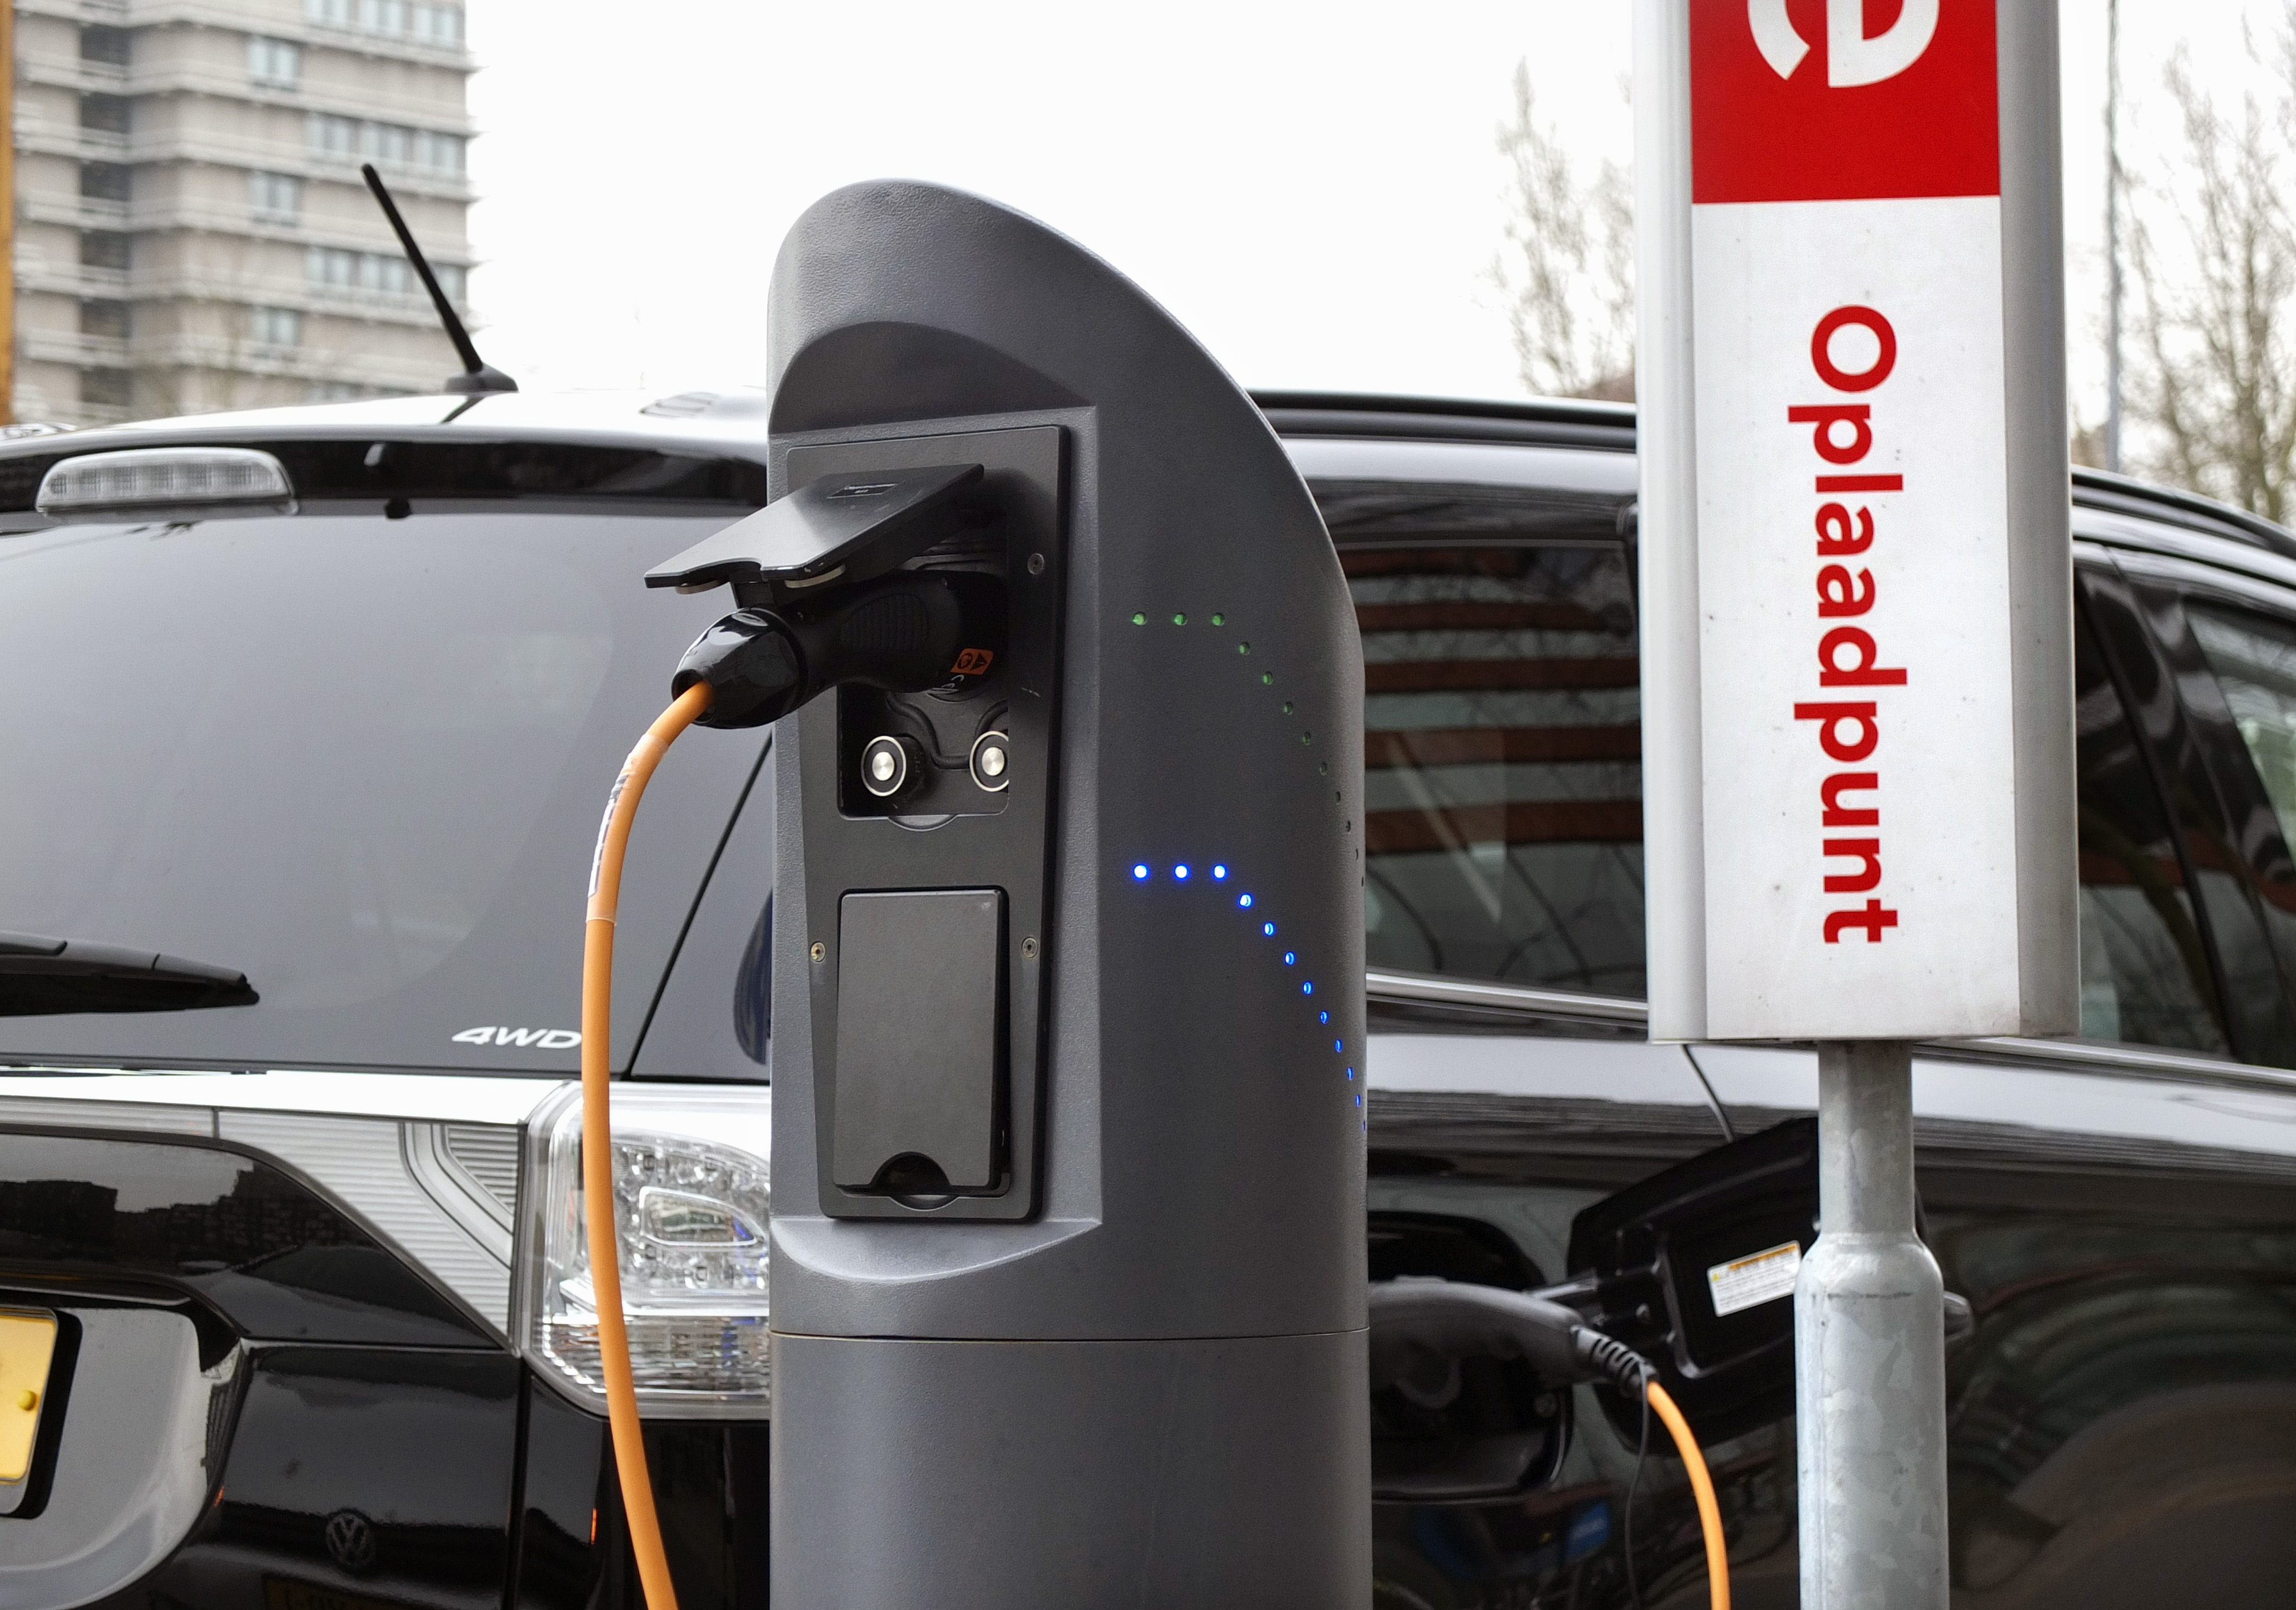 ‘Plug-in charge’ to prevent occupying charging points to long